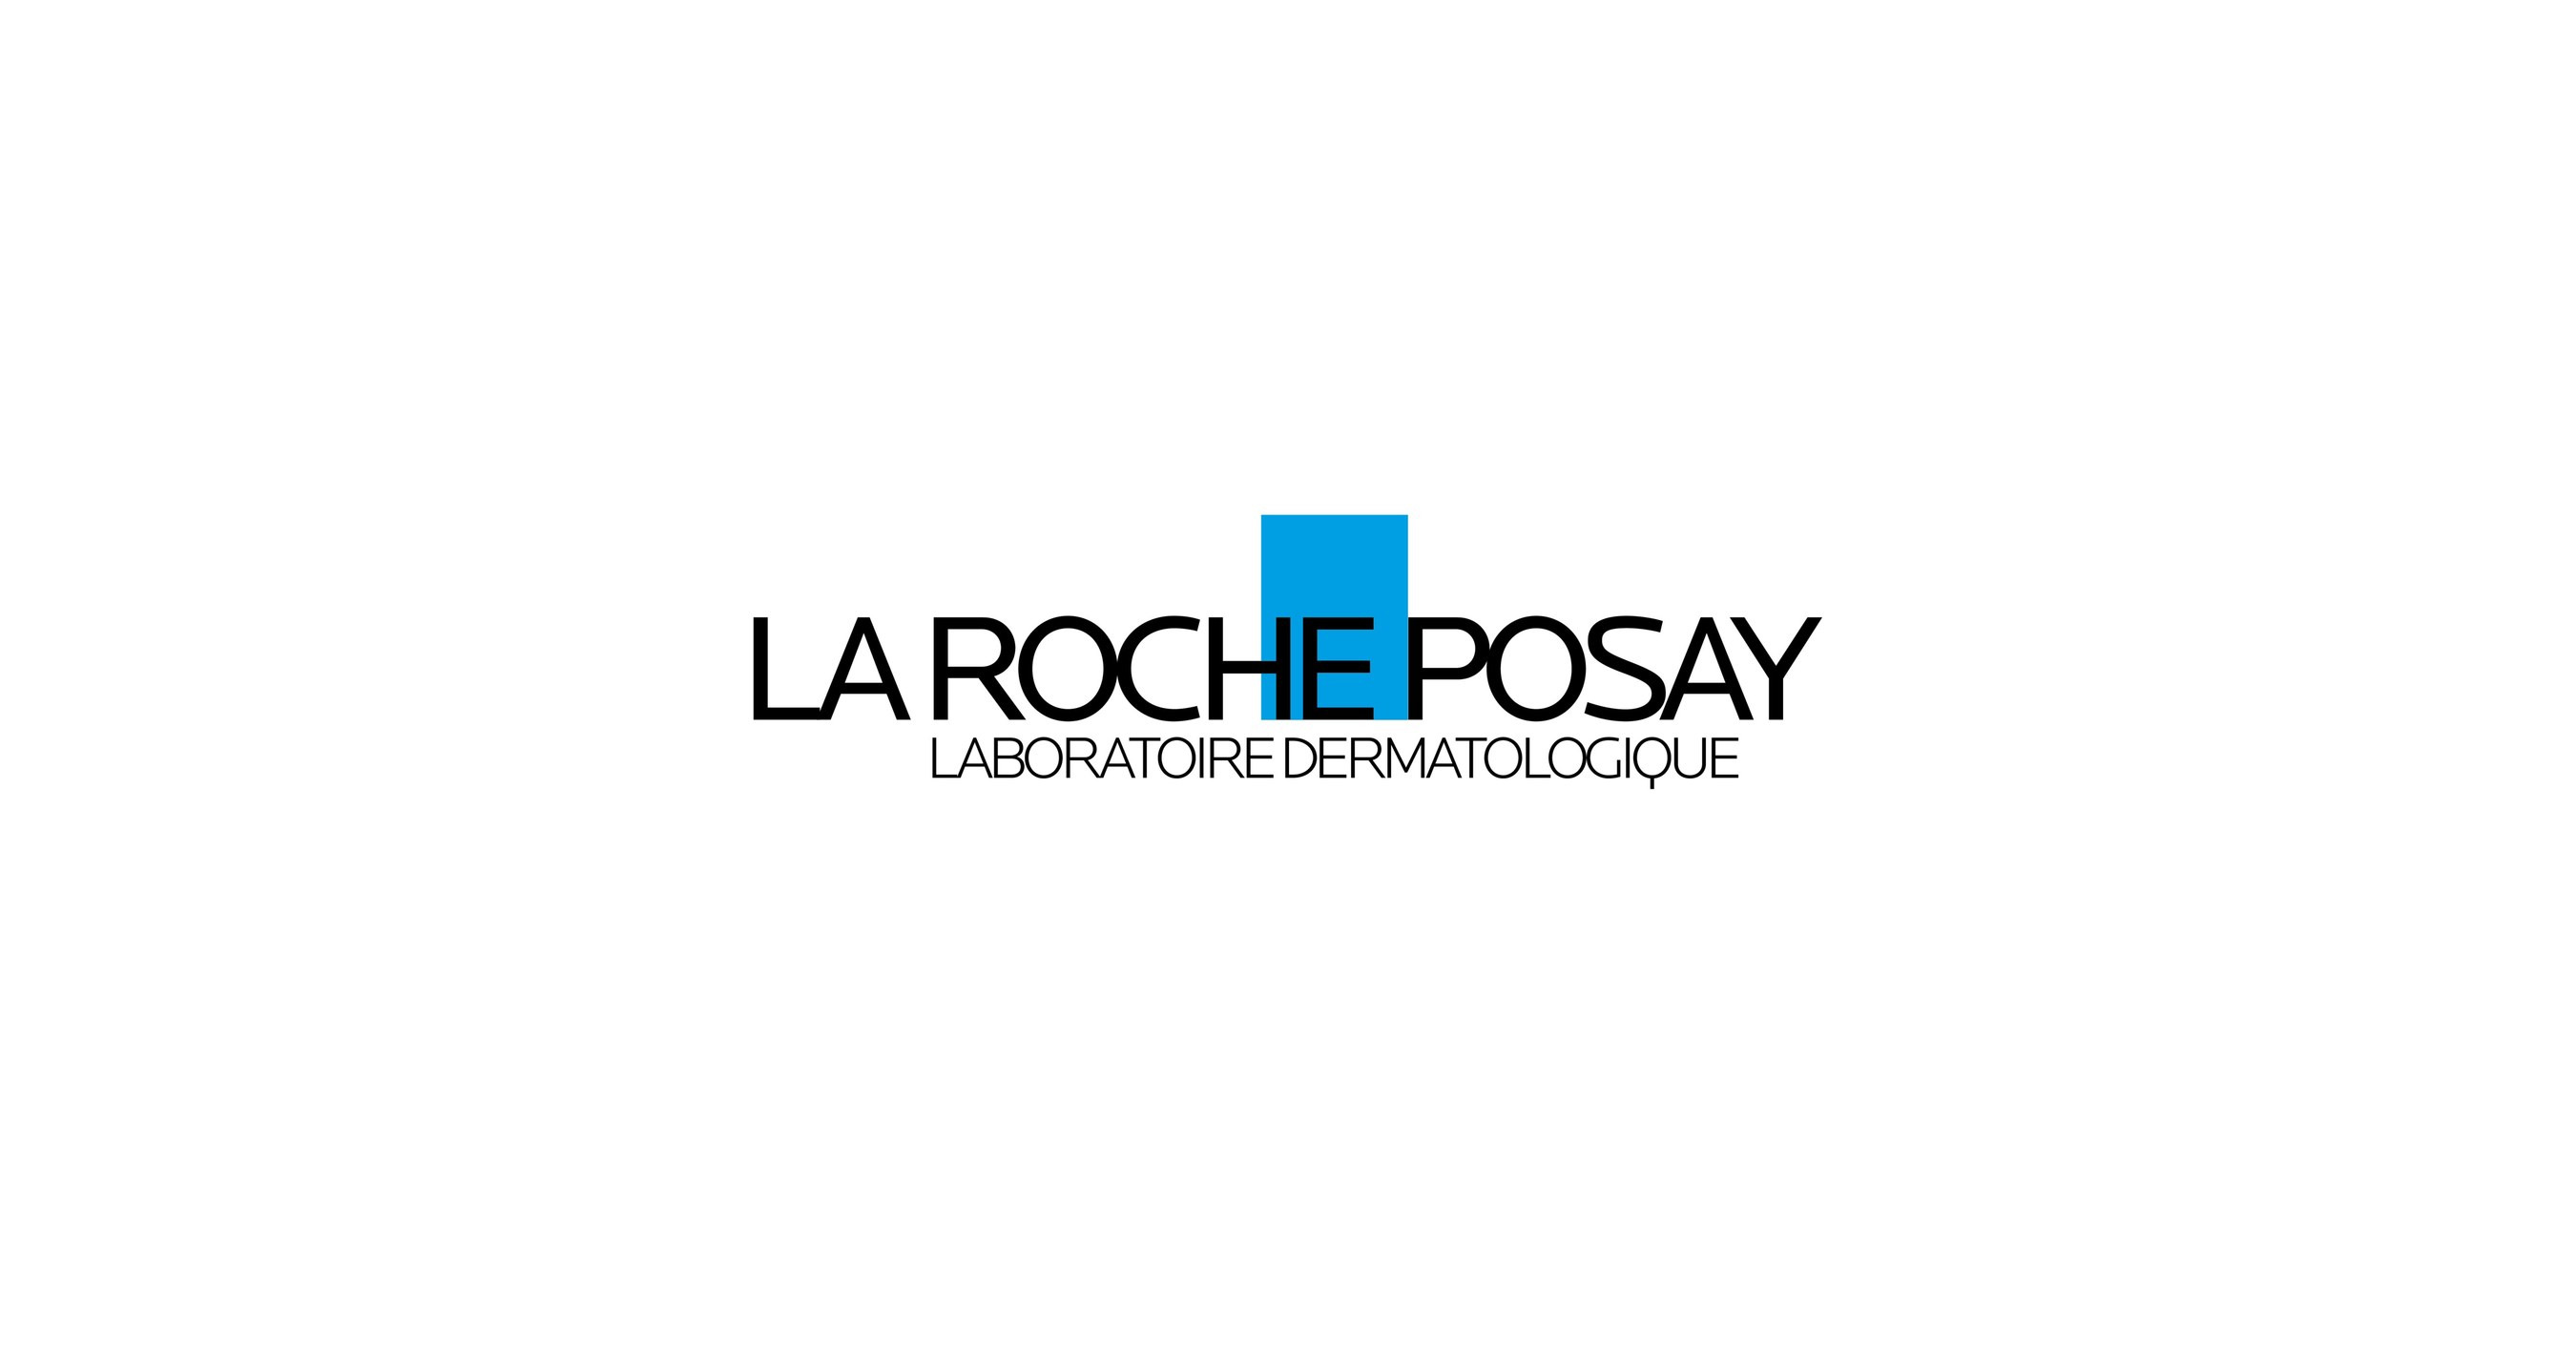 La Roche-Posay Celebrates Acne Positivity Two-Day Lab' Pop-Up Experience New City